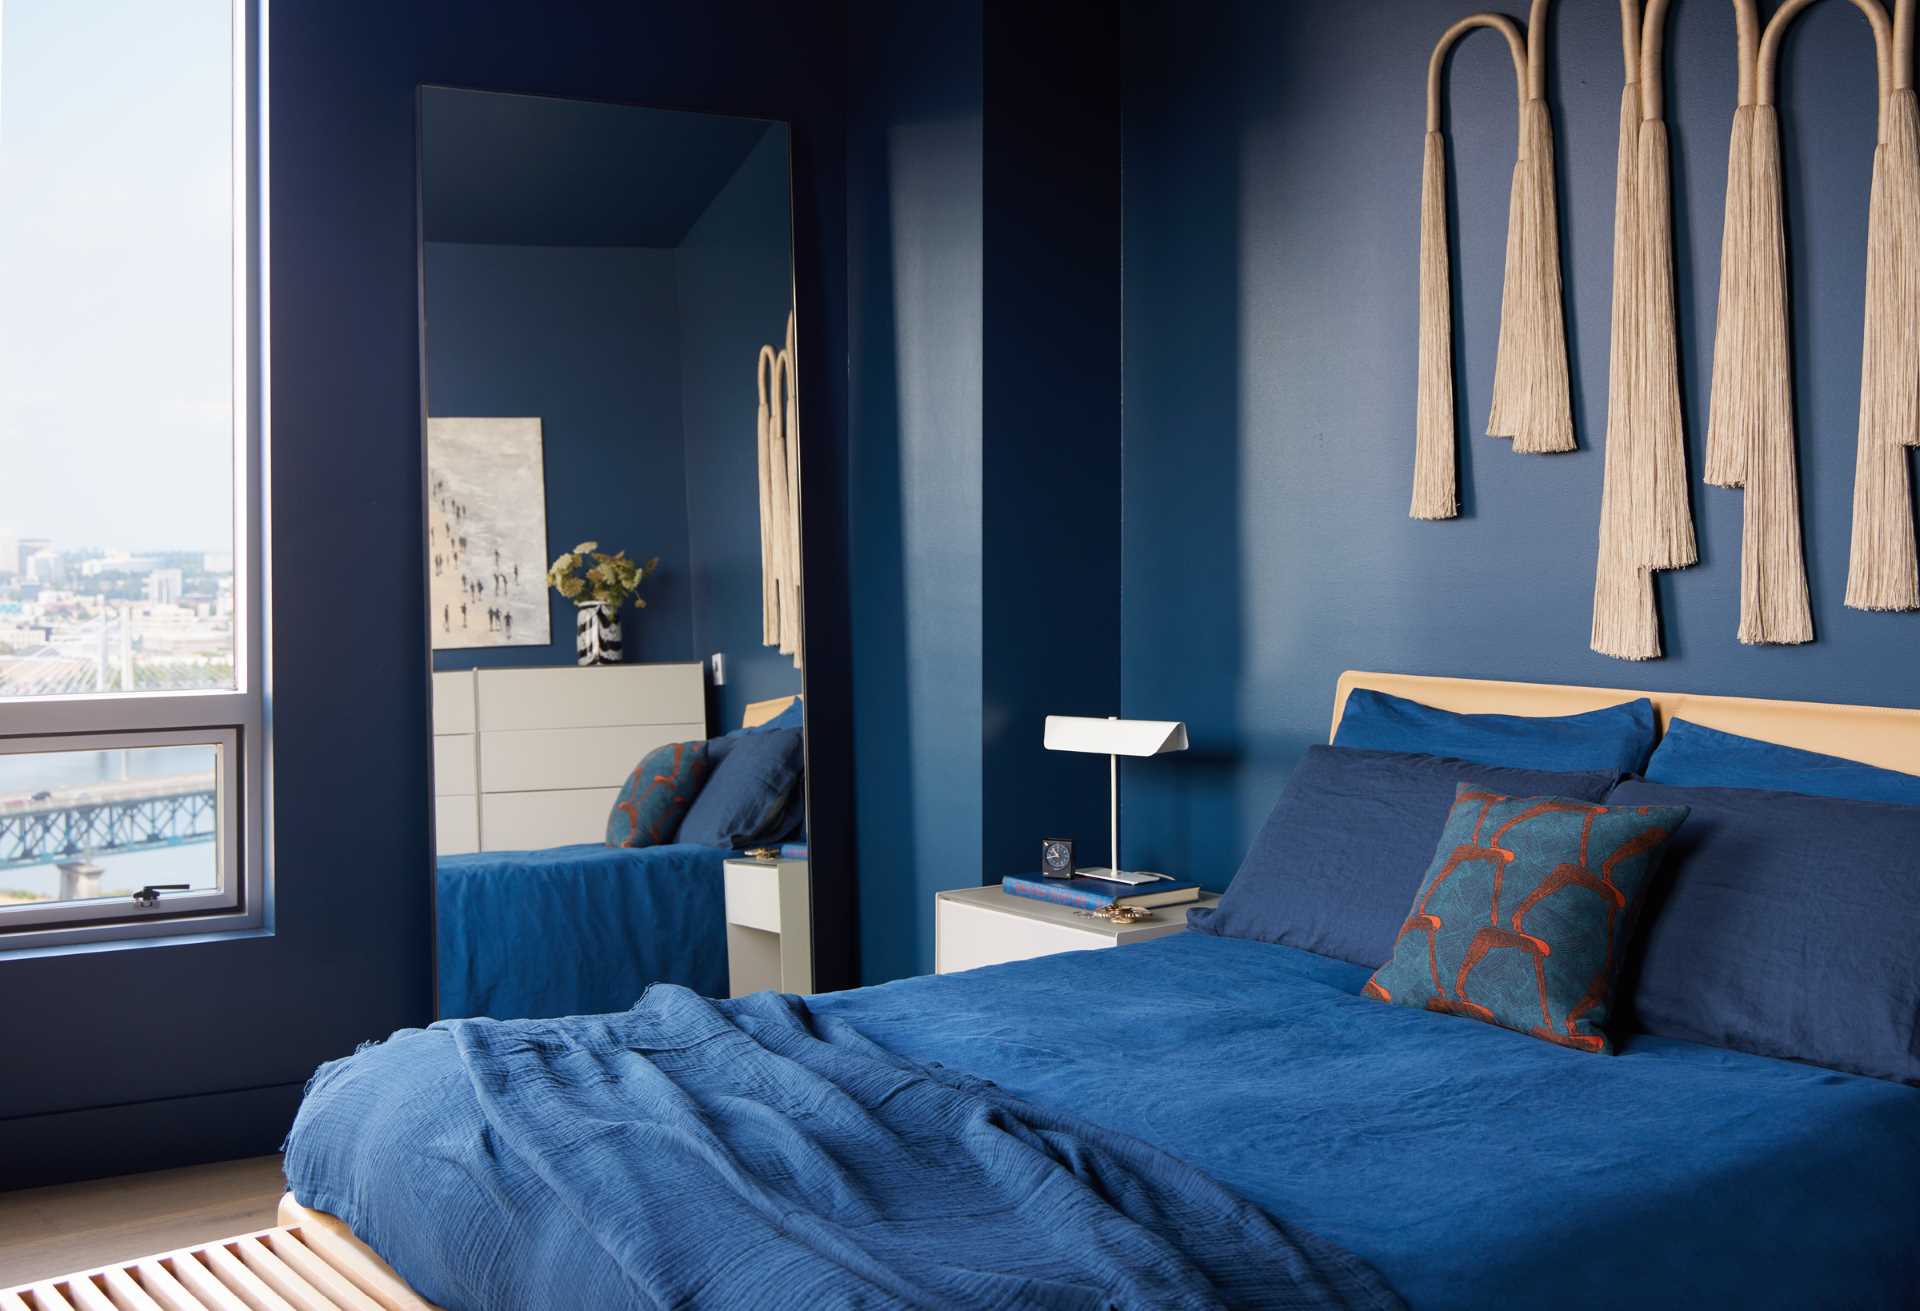 A modern bedroom with a rich blue color palette.